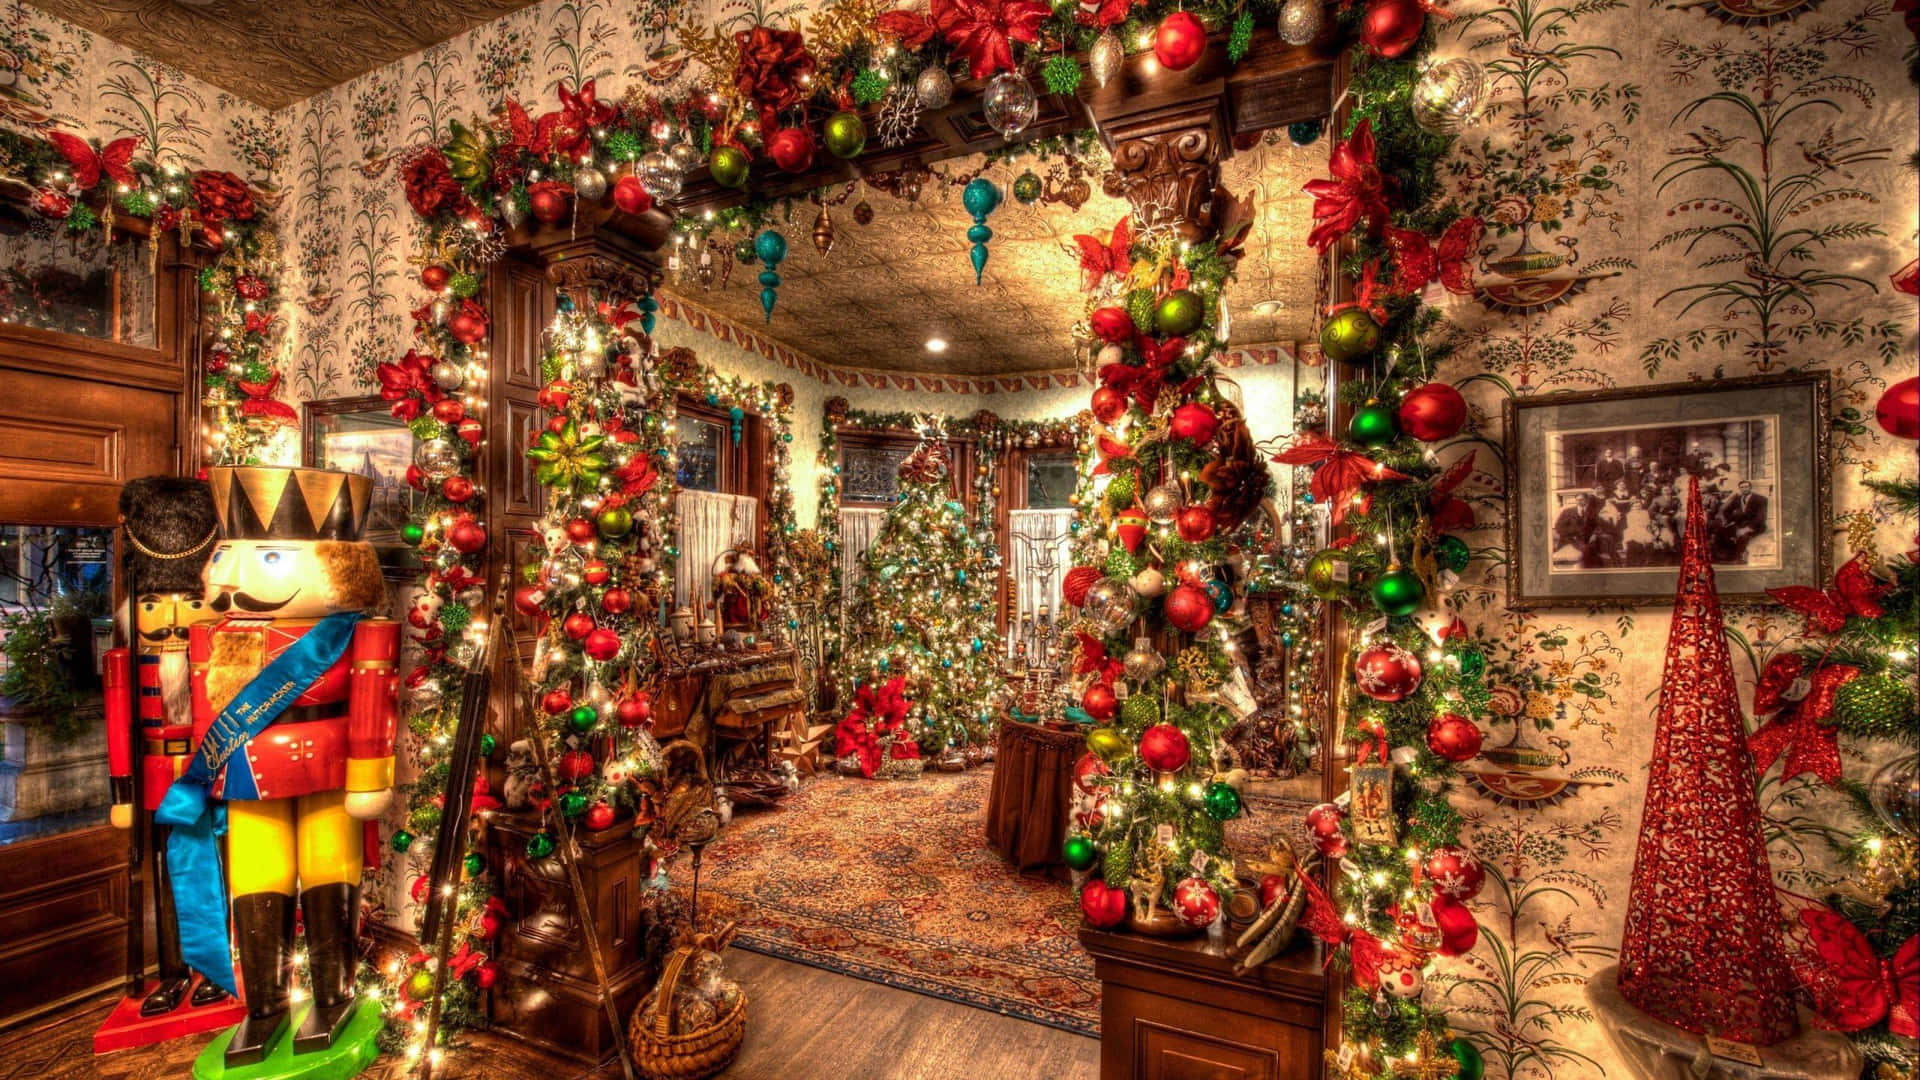 Enchanting Vintage Christmas Wallpaper with Classic Decorations